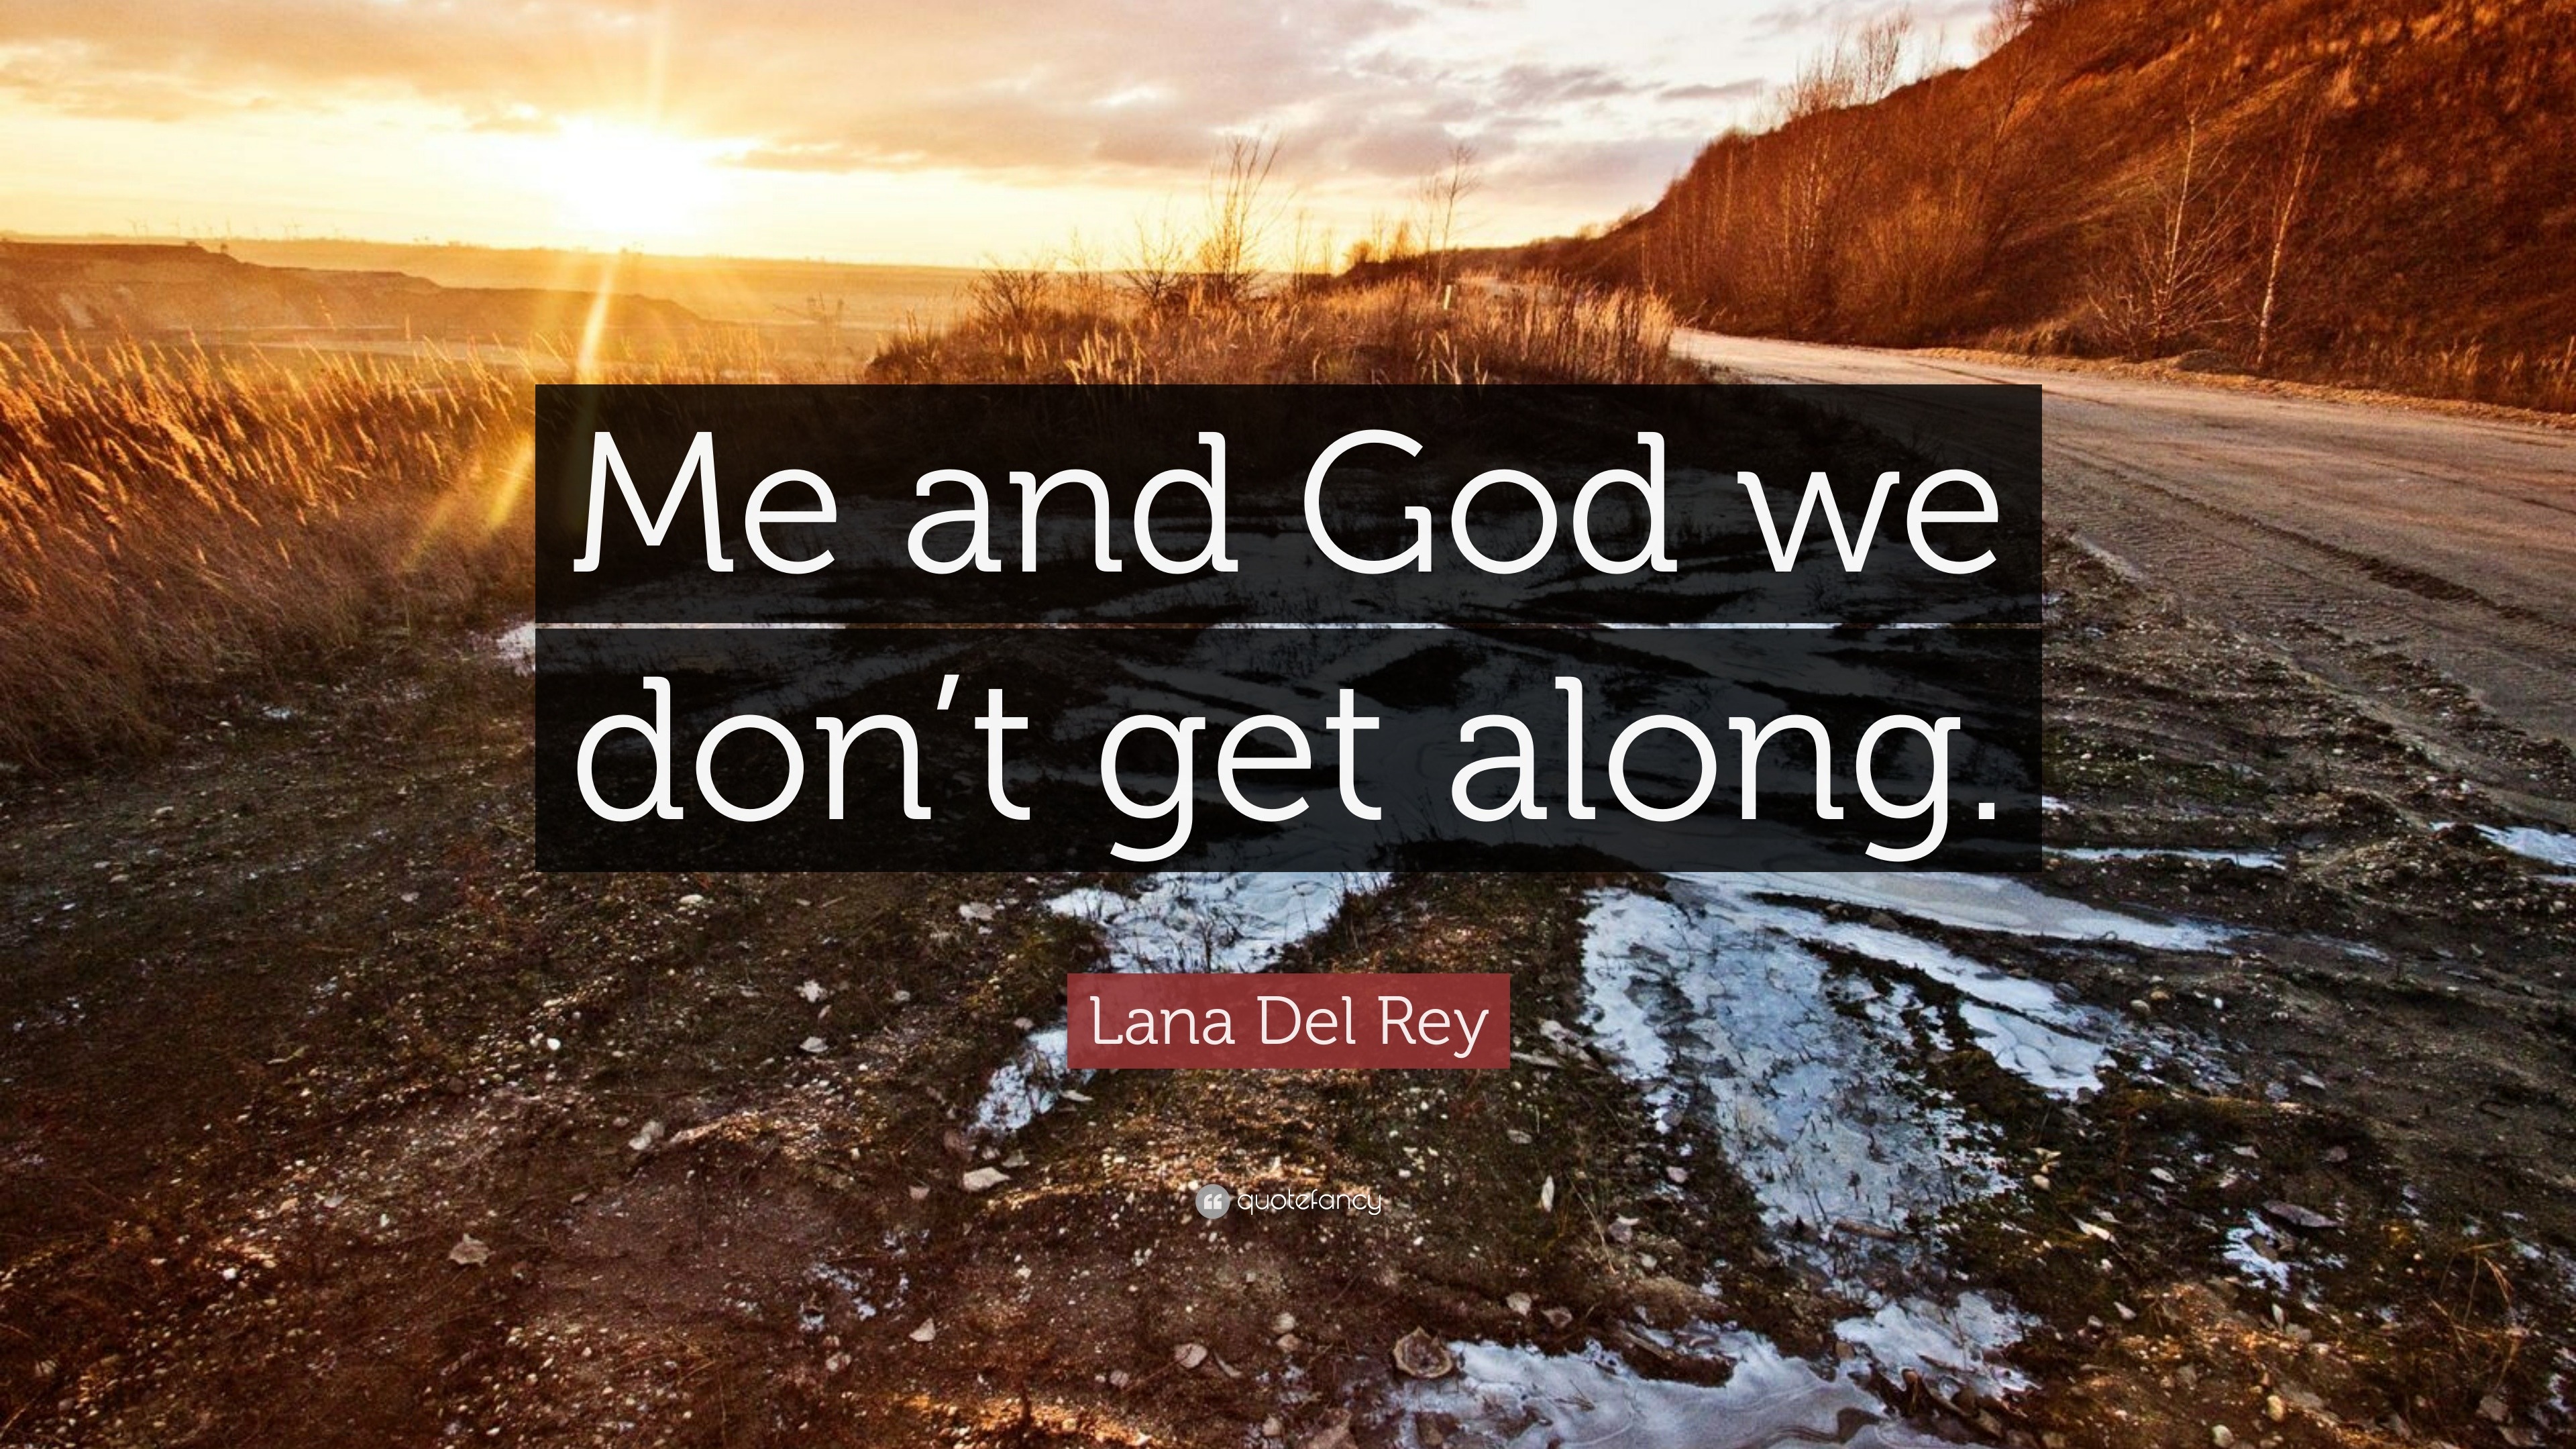 Lana Del Rey Quote: "Me and God we don't get along." (10 wallpapers) - Quotefancy